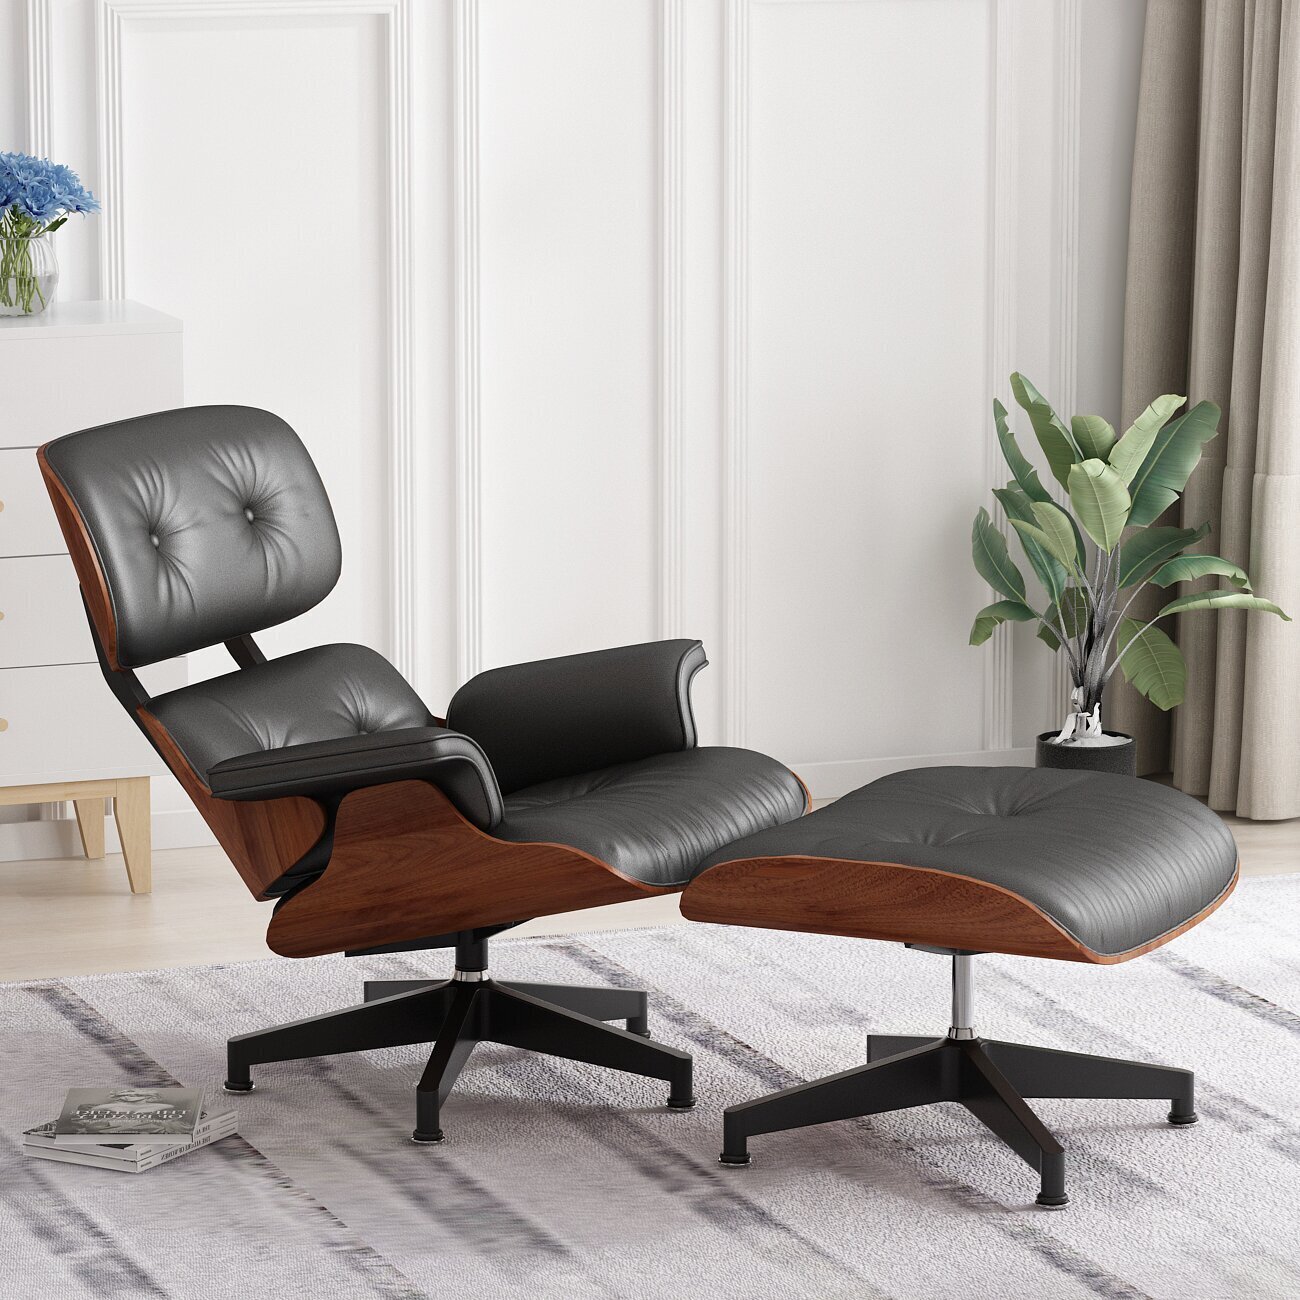 Small Leather Swivel Chair with Ottoman